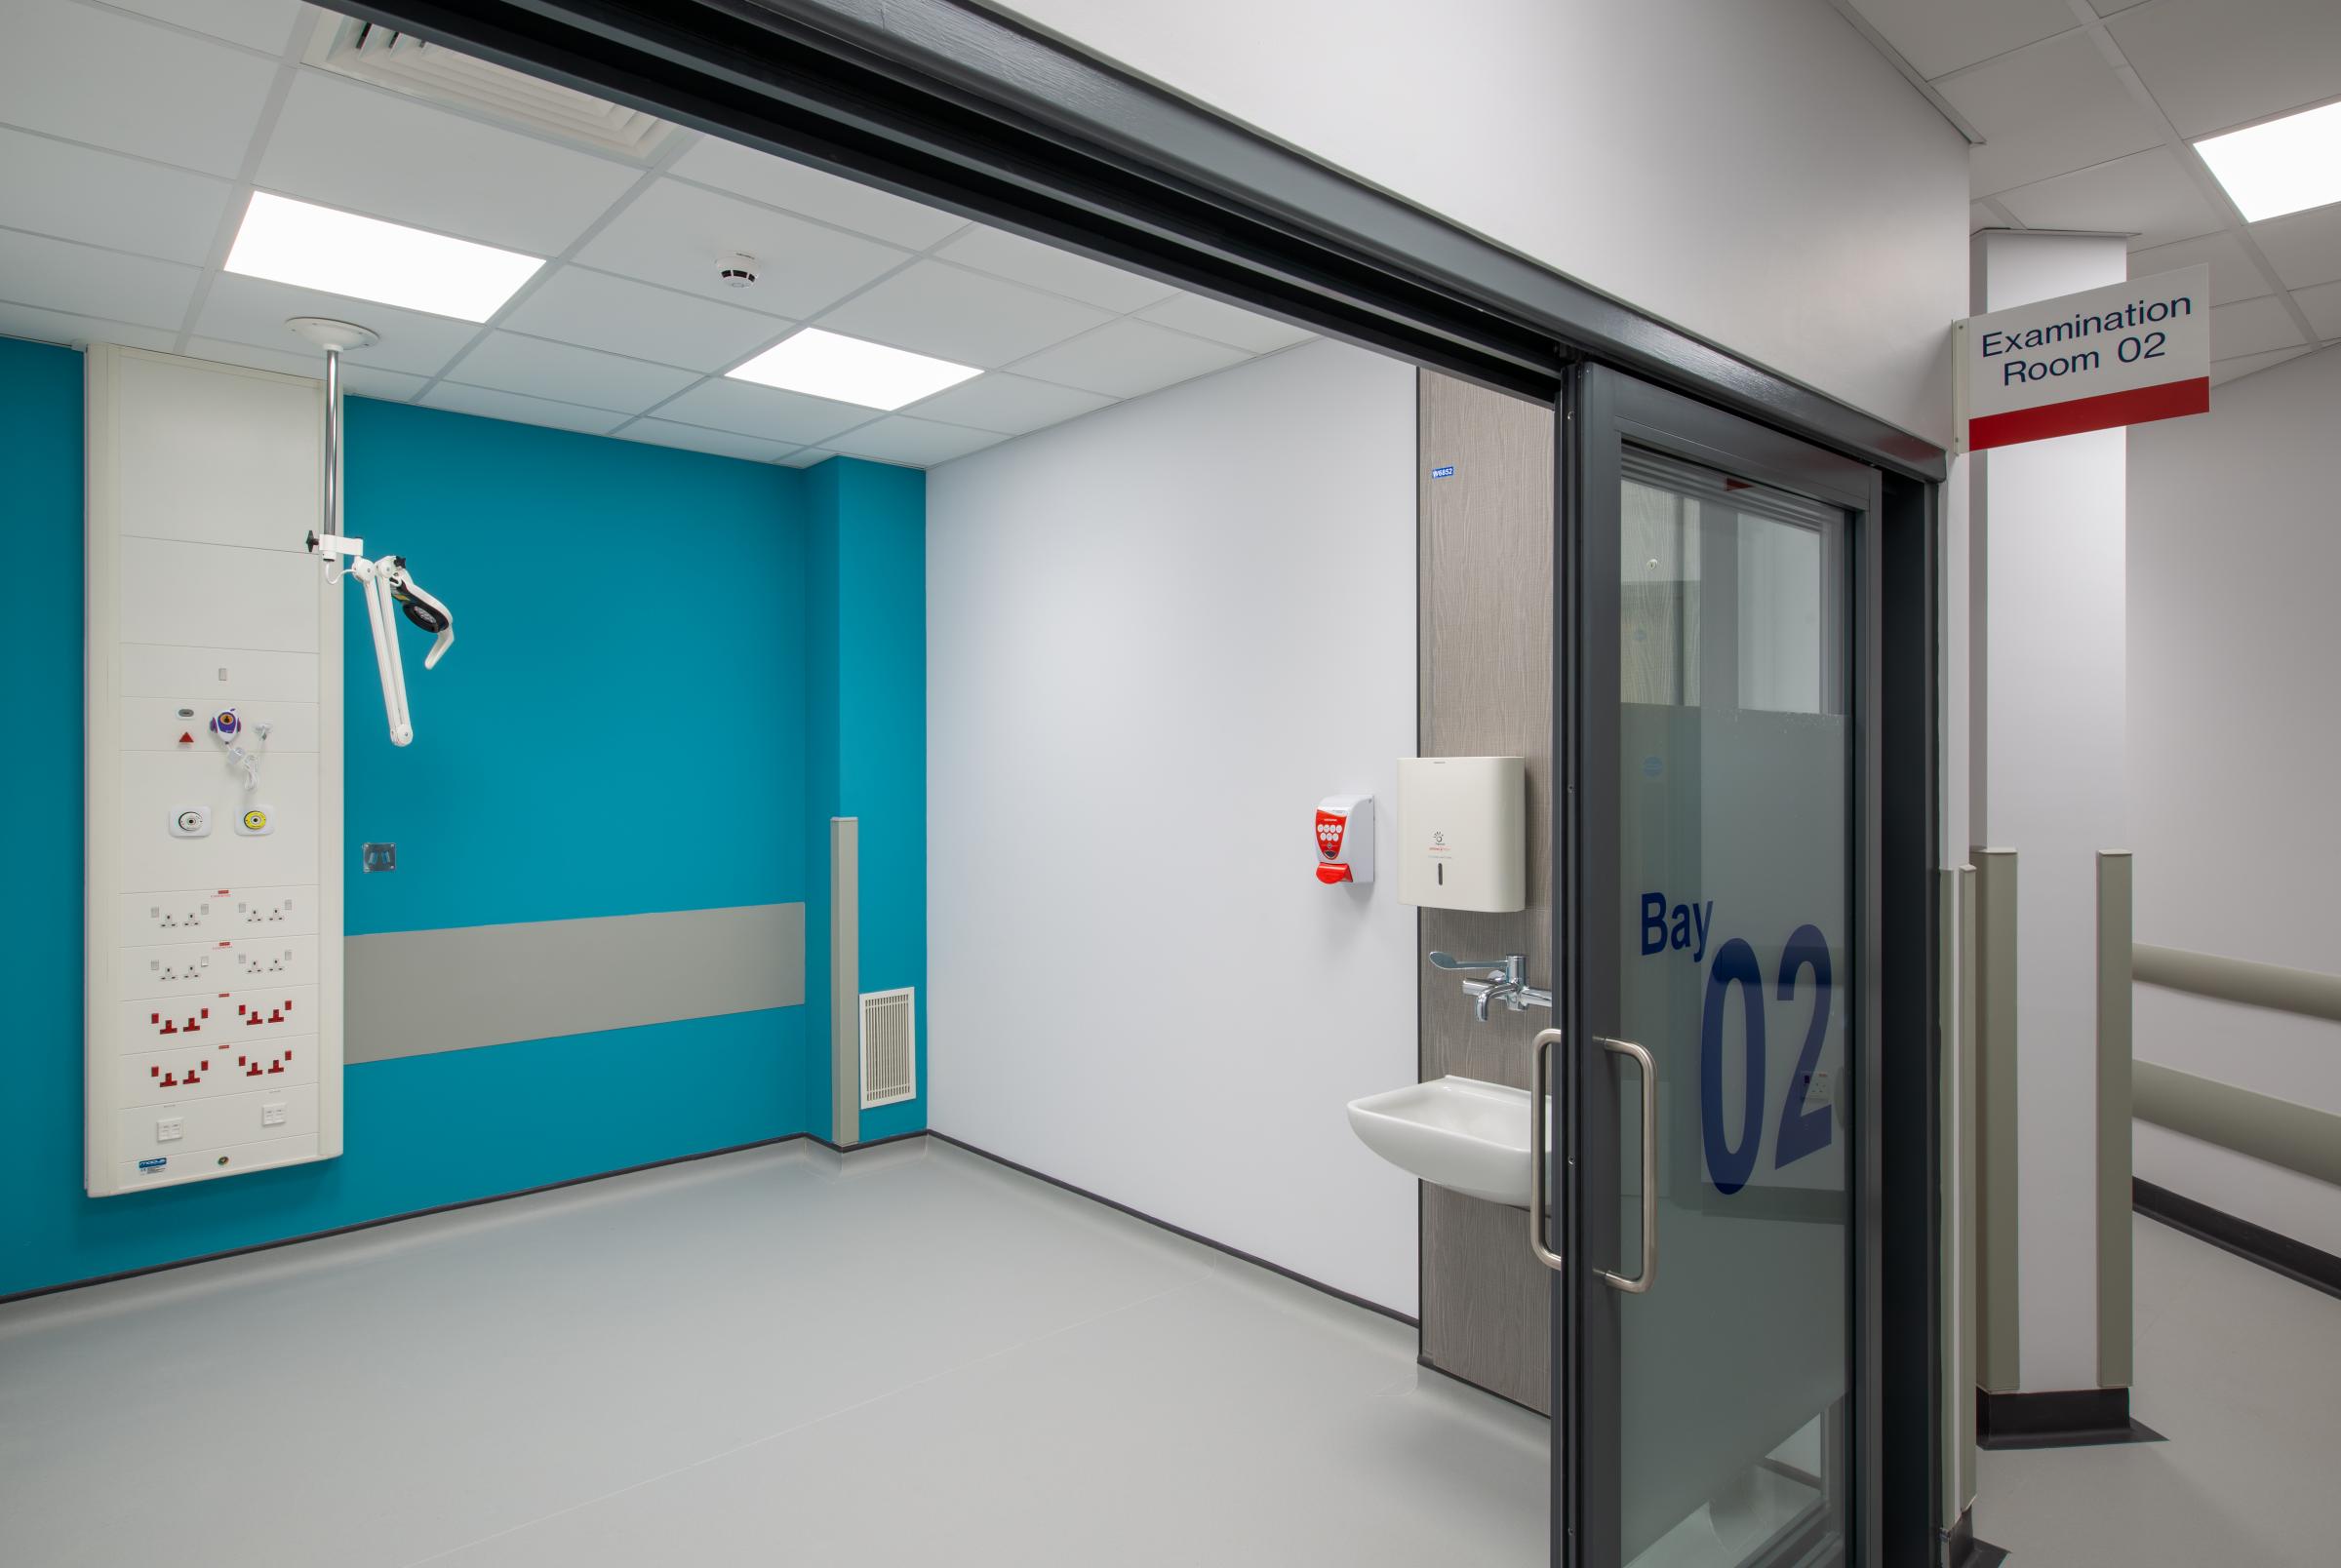 The interior of the new extension at Warrington Hospital